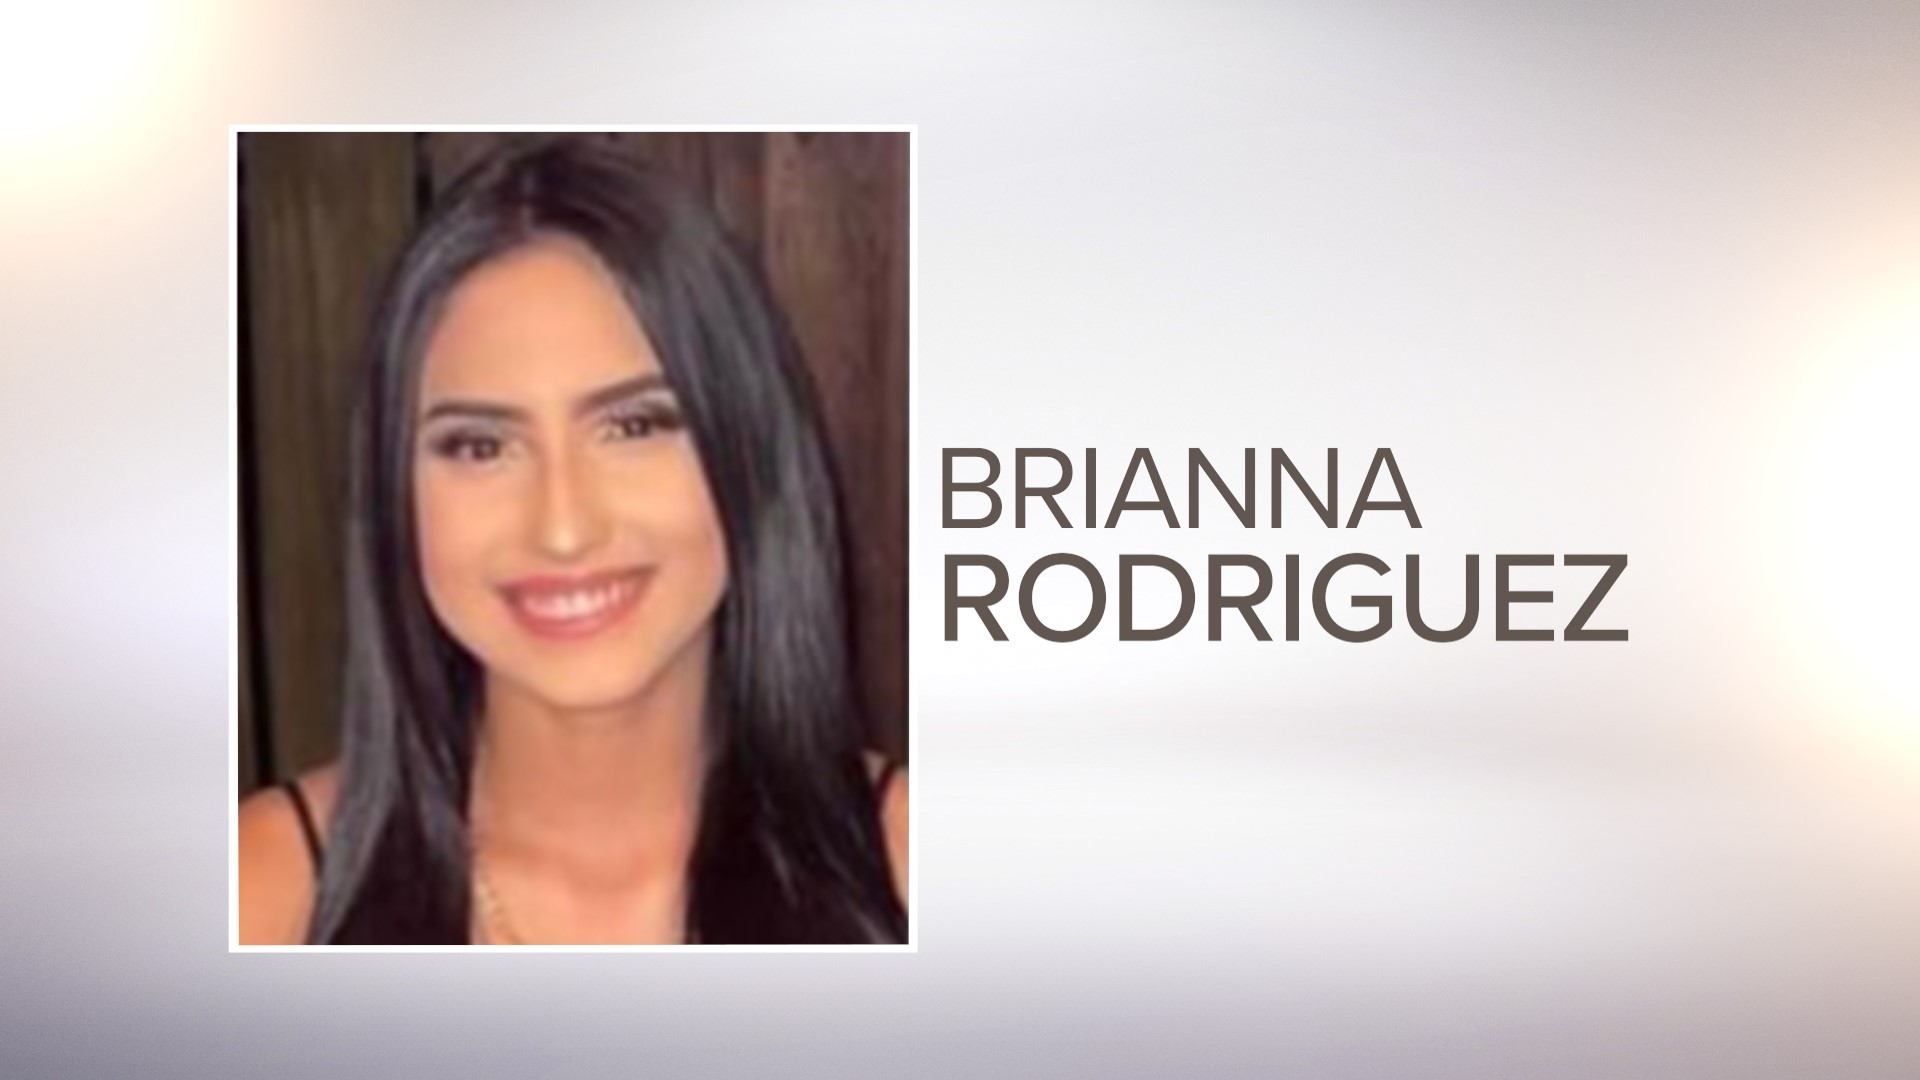 The funeral was held at La Paz funeral home on Saturday. Brianna was one of nine people killed at Astroworld Festival last Friday.